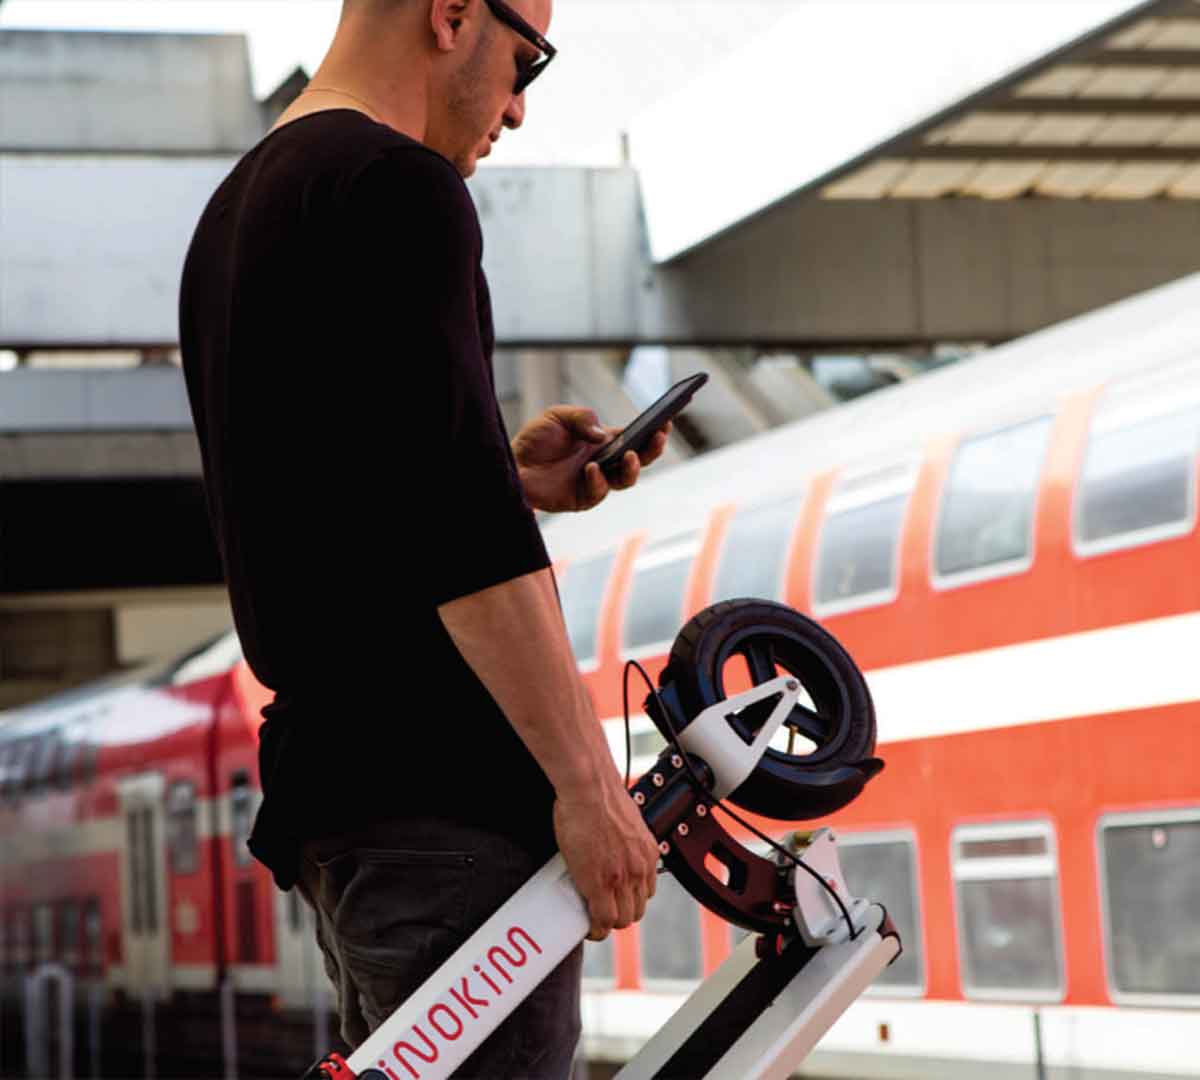 Commuter decoding the tech specs on his smartphone while holding a compact Inokim electric scooter, showcasing the blend of technology and modern transportation.